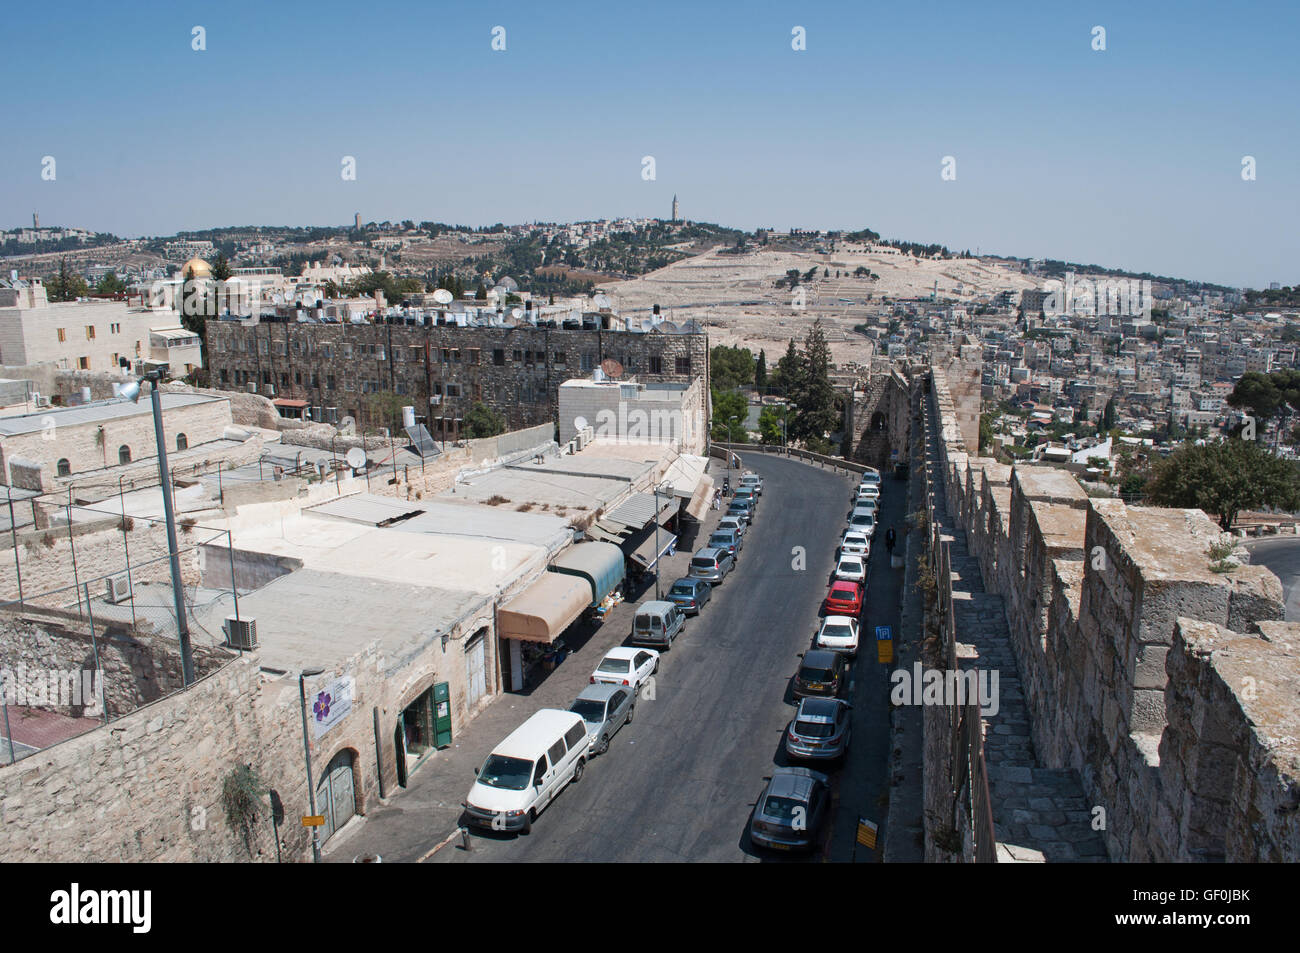 Jerusalem, Israel: the Mount of Olives seen from the ancient walls of the Old City, a tourist attraction with its walking tours Stock Photo